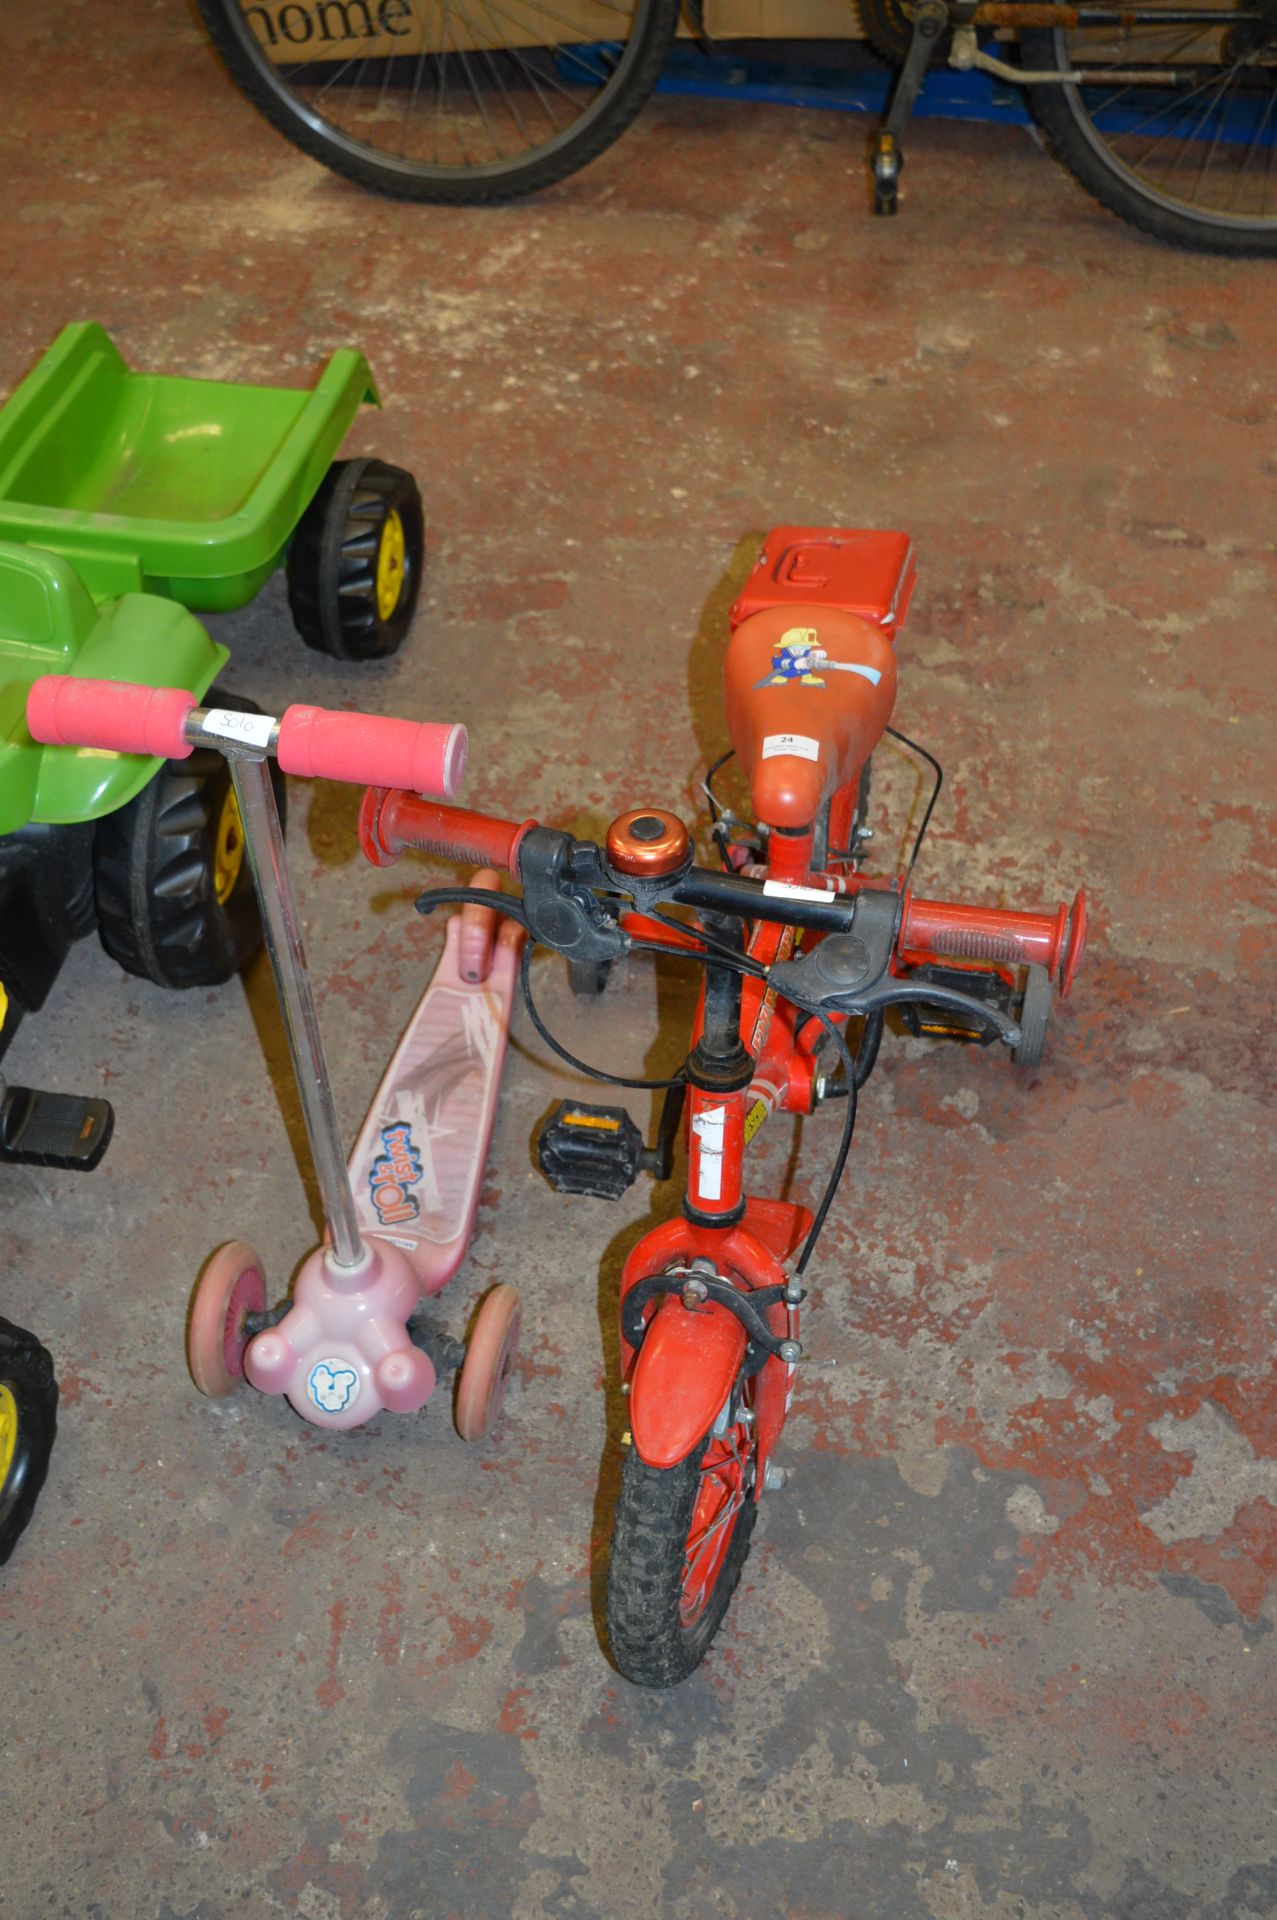 Fire Chief Child Bicycle with Stabilisers, and a Pink Three Wheel Scooter